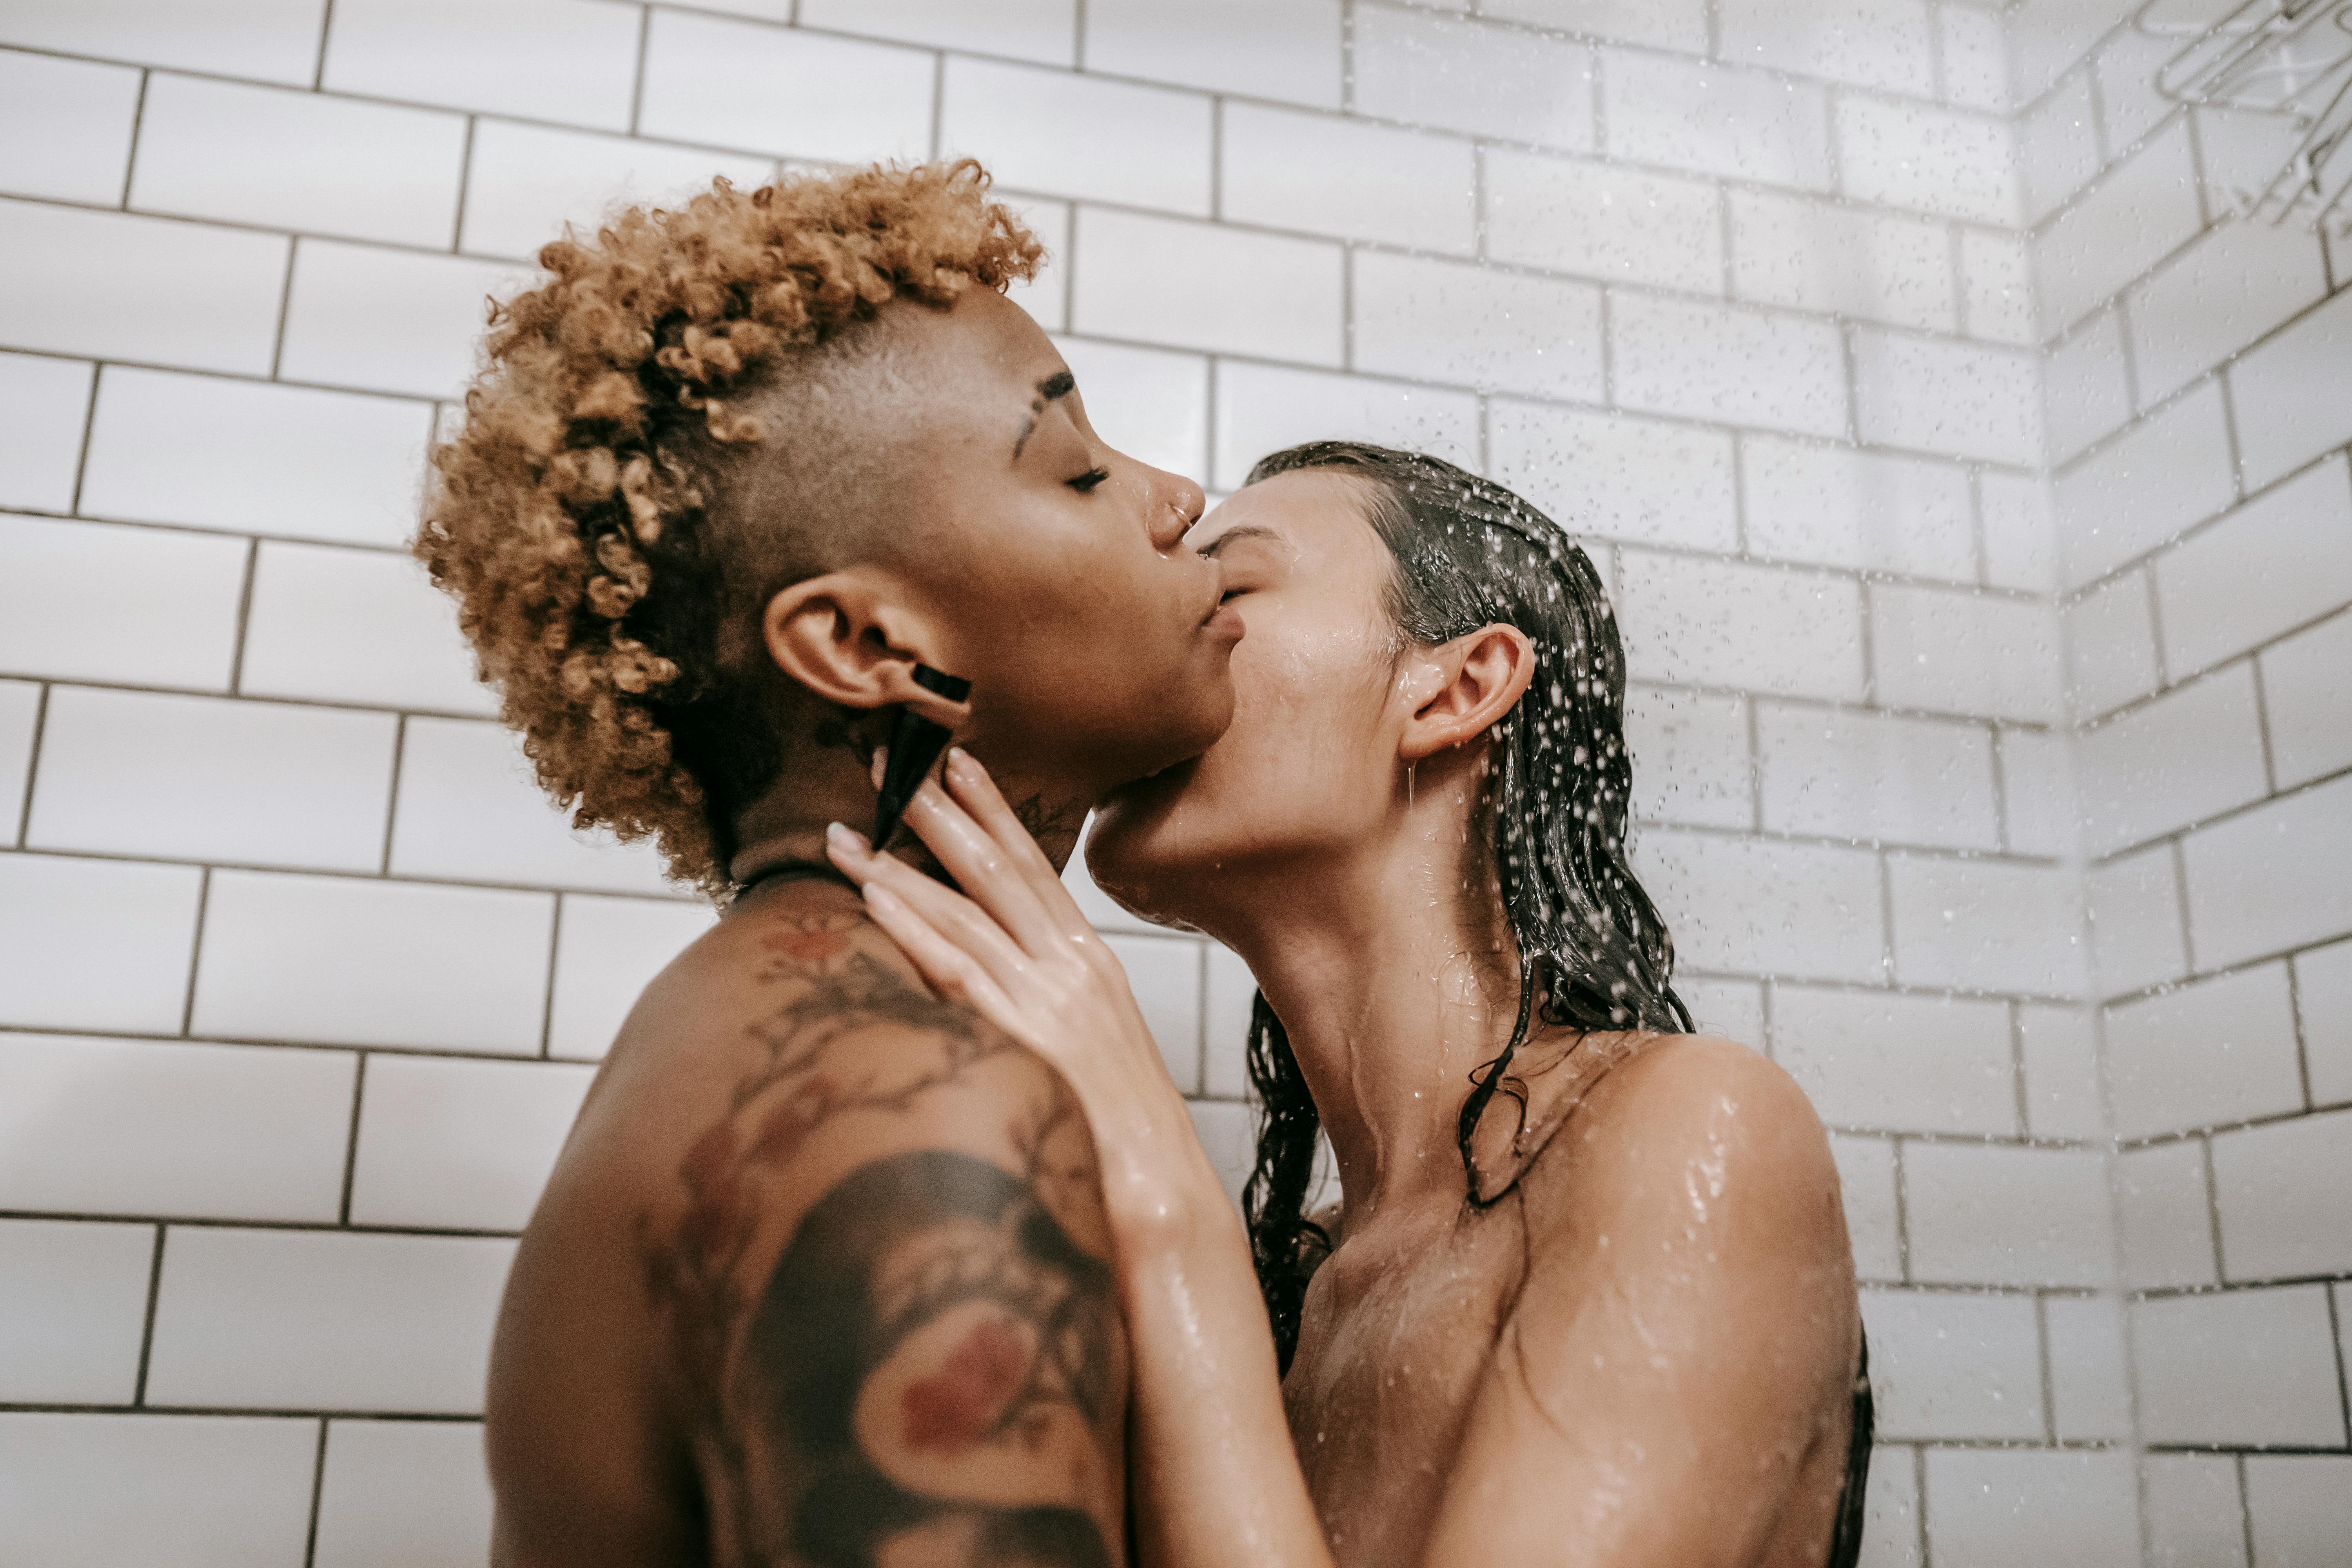 Lesbians making out in shower